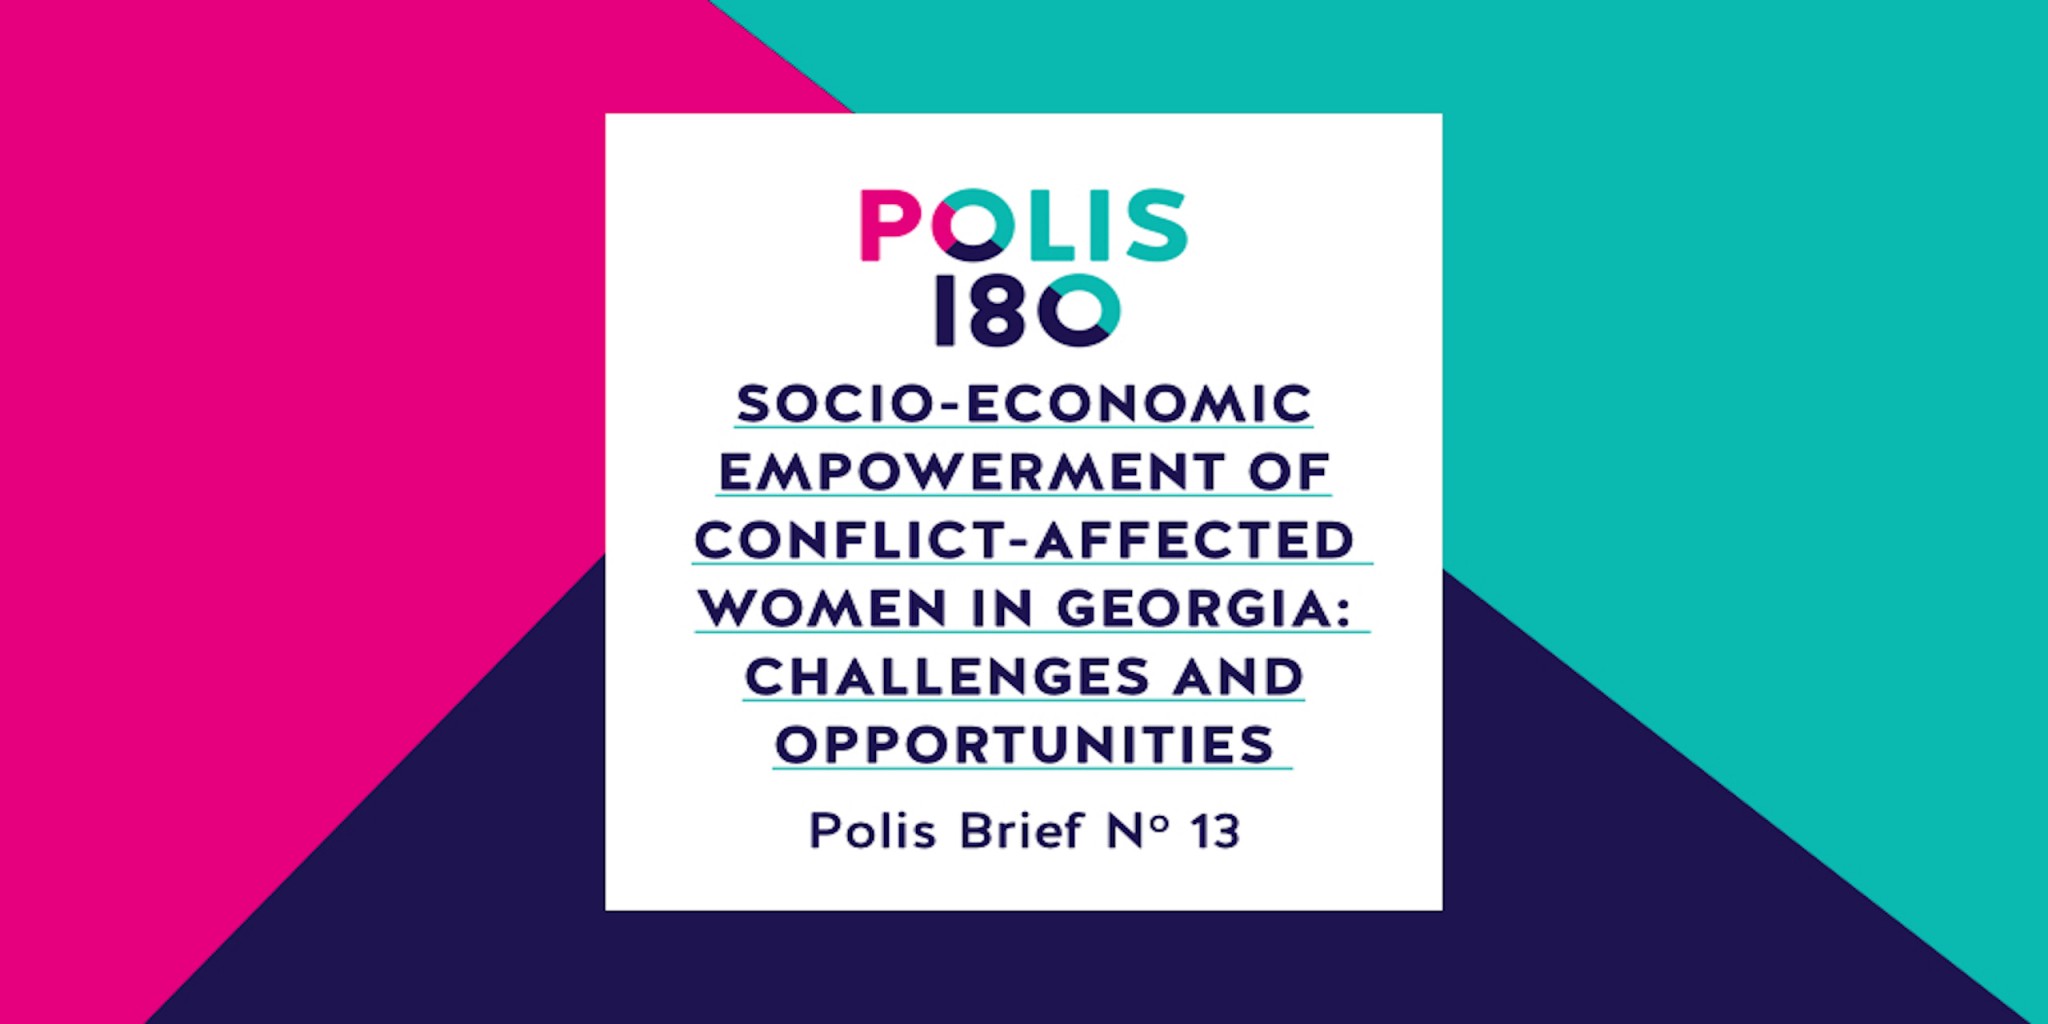 In her Polis Brief, Ana Lolua looks at the socio-economic challenges facing conflict-affected women in Georgia today. More specifically, the brief analyzes gaps in Georgia’s official strategy to deal with the socio-economic inequalities these women experience as a result of armed conflict and subsequent displacement.